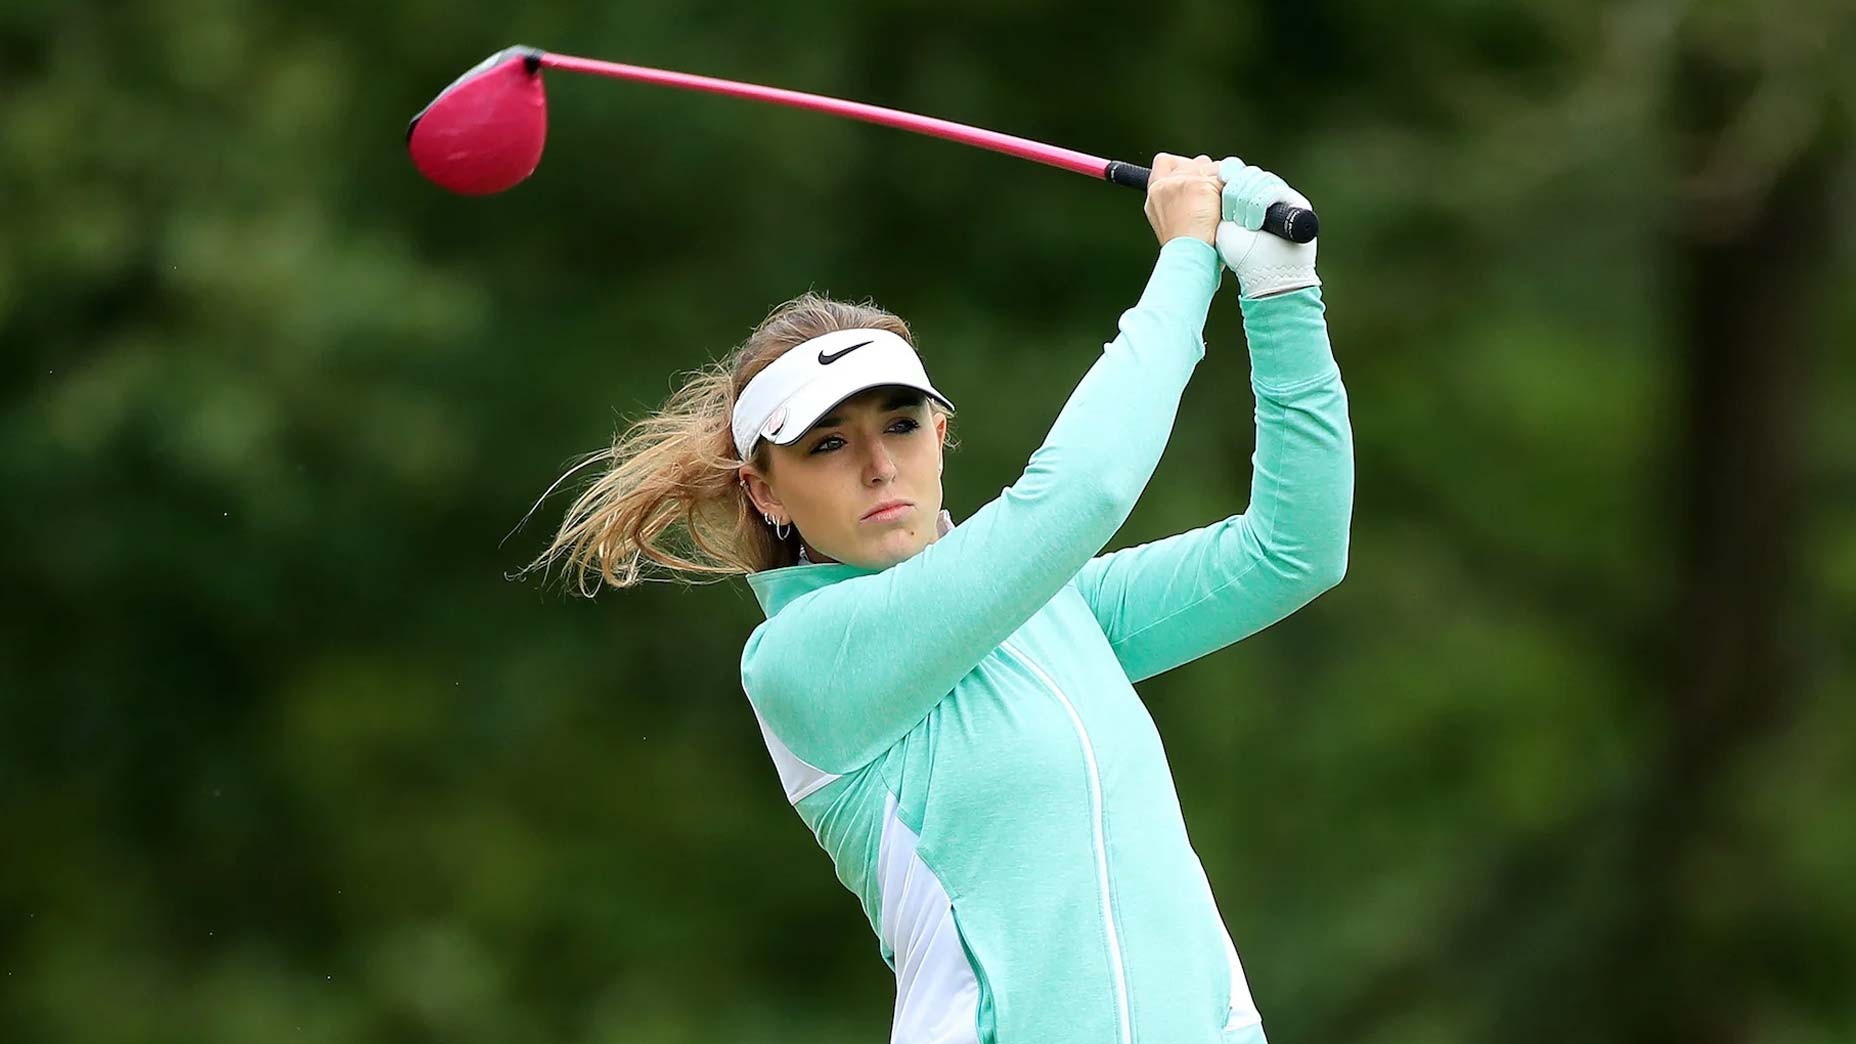 Should more men actually be using golf equipment made for women?